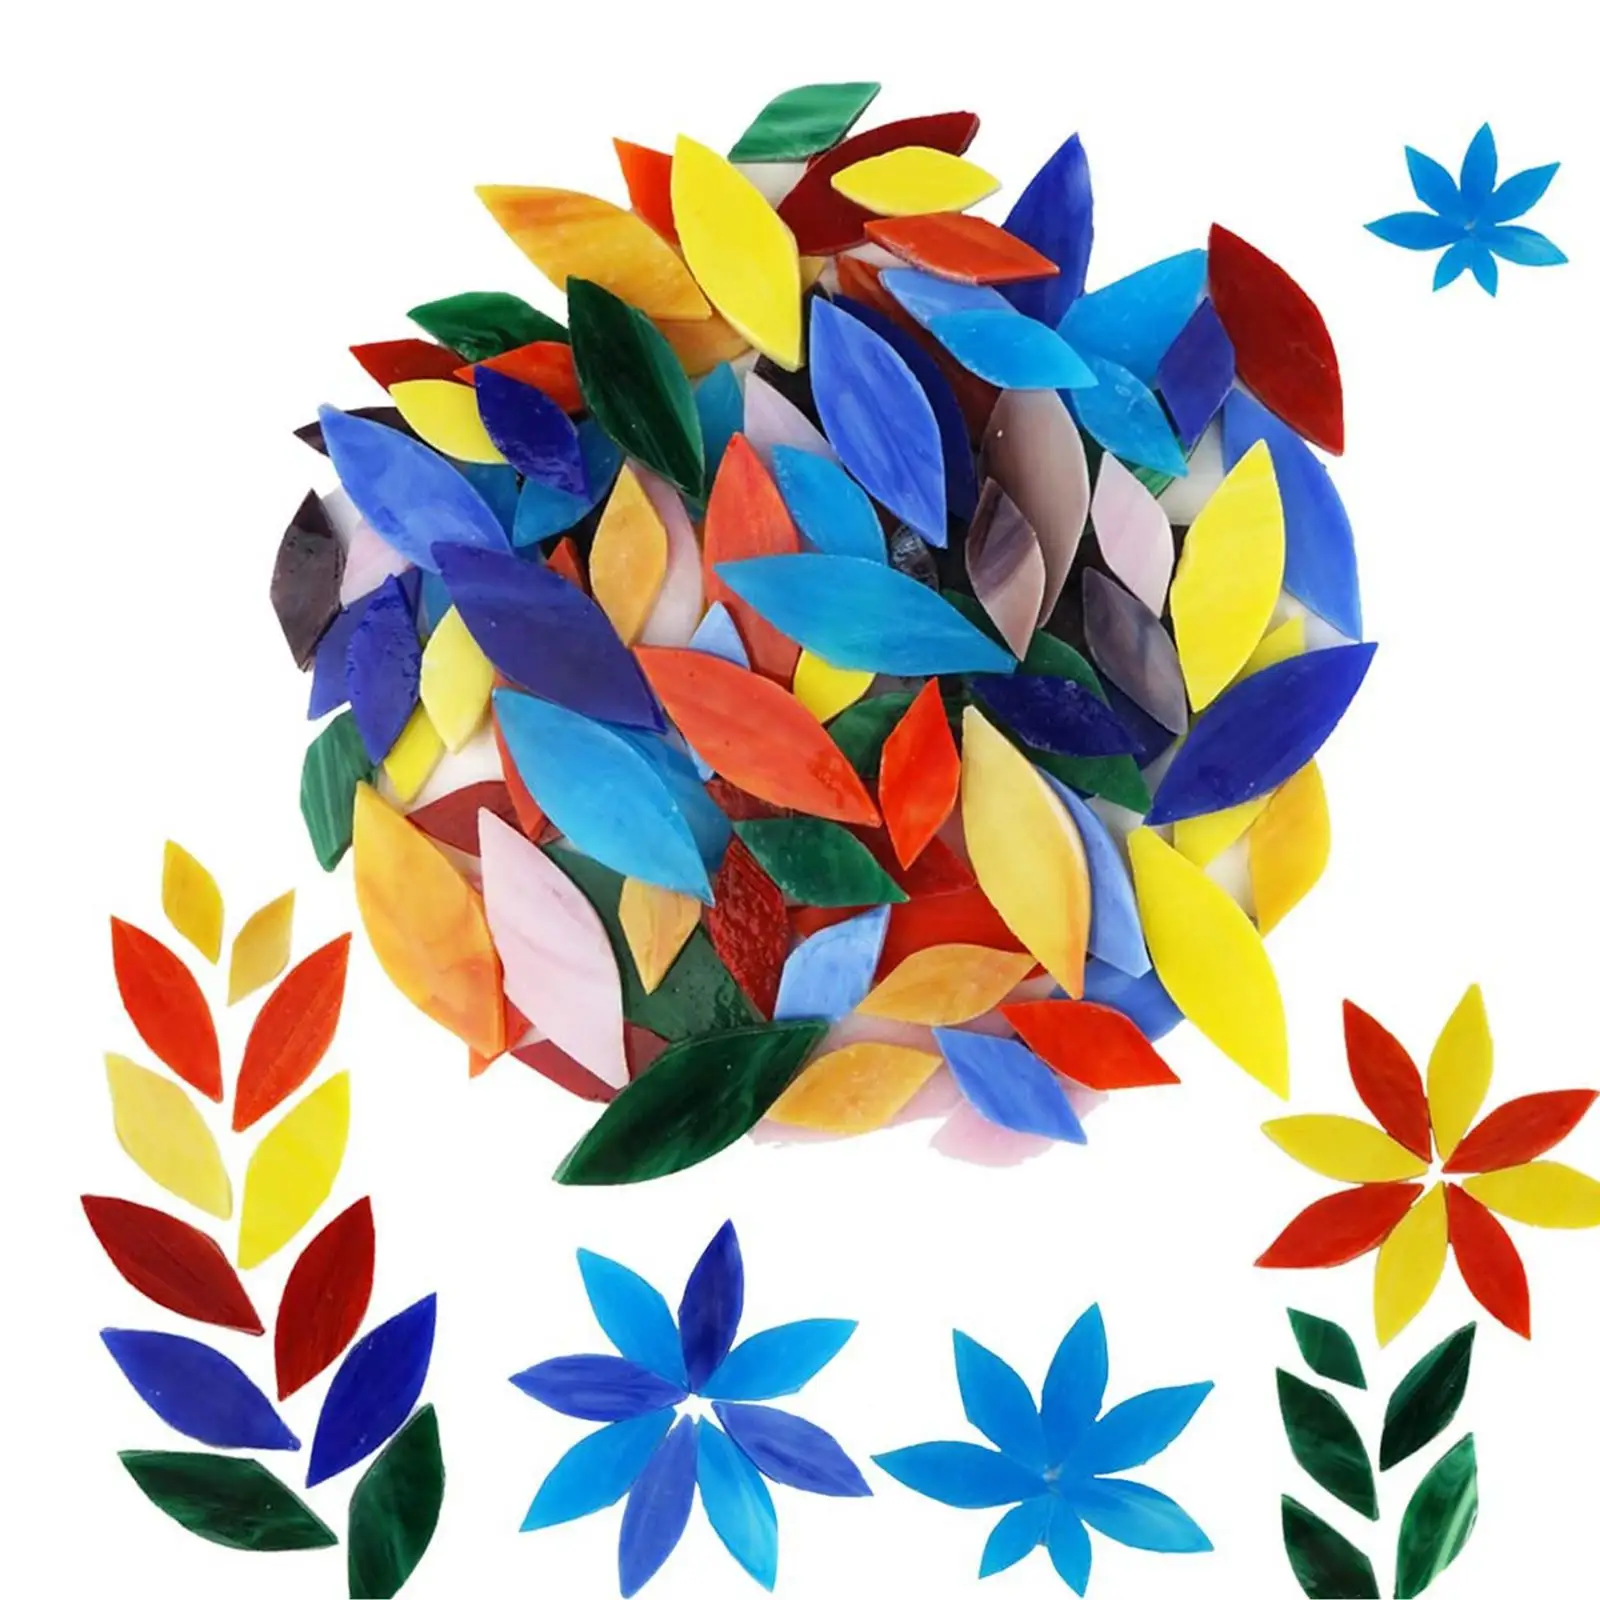 100pcs Assorted Colors Petal Mosaic Tiles Hand-Cut Stained Glass for Crafts